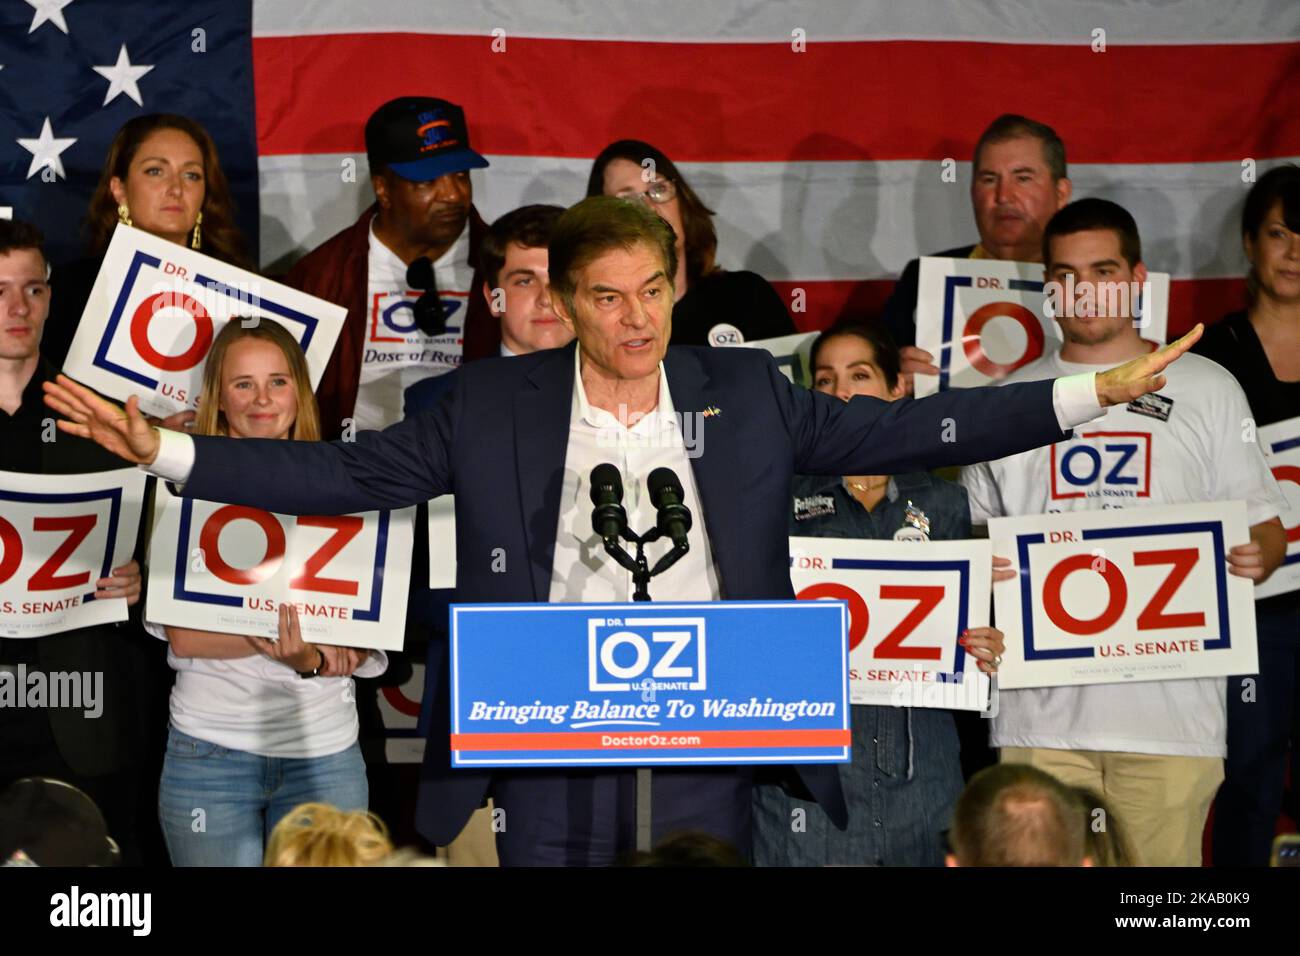 Bensalem, United States. 01st Nov, 2022. Dr. Mehmet Oz, Republican candidate for U.S. Senate speaks during a rally in Bensalem, PA, USA on November 1. 2022. With a week left until Election Day, Oz and his opposition, Democratic candidate PA Lt. Gov. John Fetterman, hold rallies around the Keystone State to find support for their campaigns in a thigh and closed-watched race of a Pennsylvania U.S. Senate seat. Credit: OOgImages/Alamy Live News Stock Photo